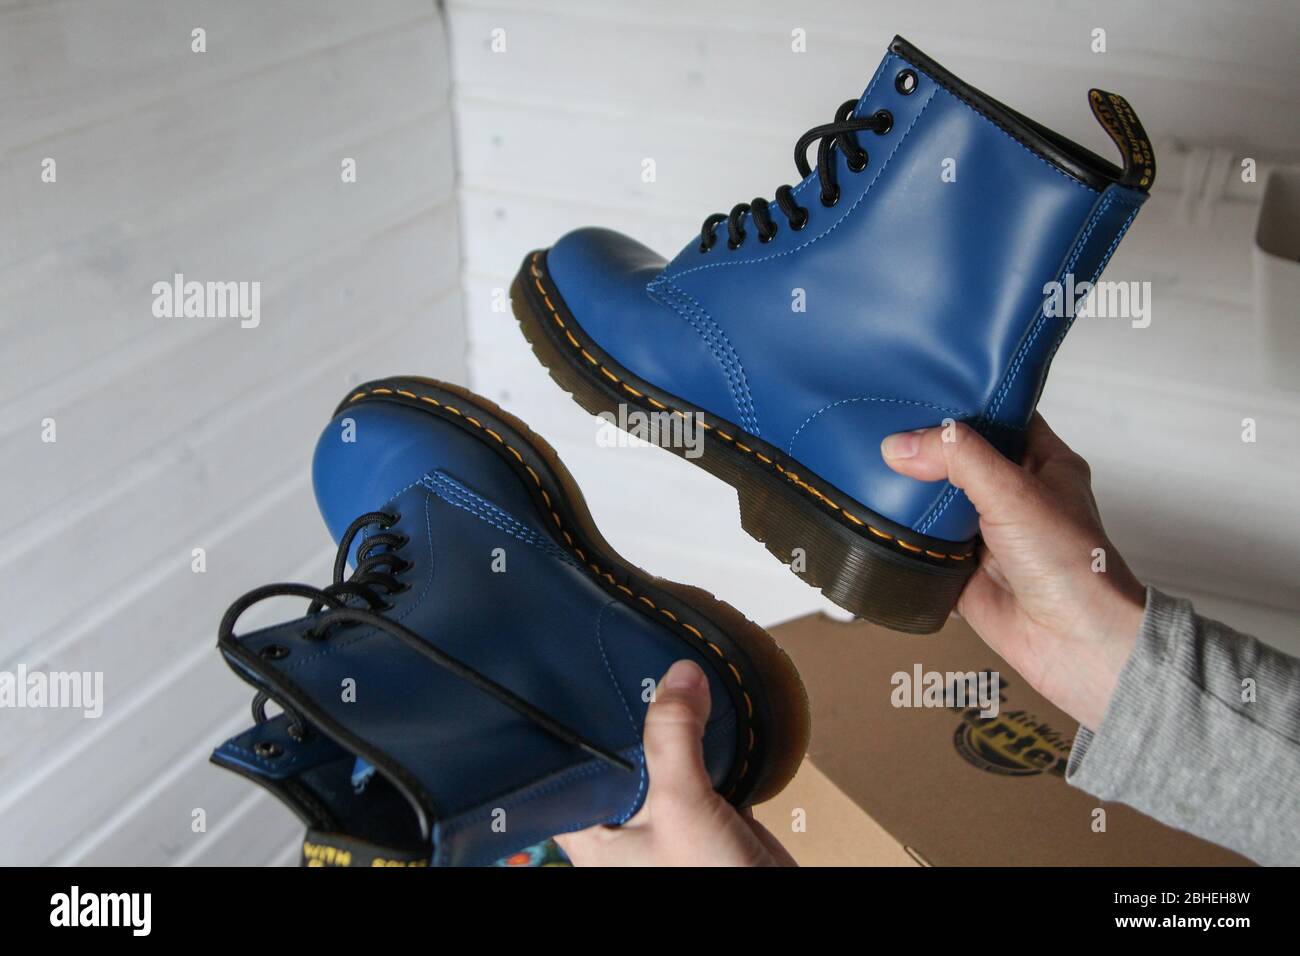 Oslonino, Poland 25th, April 2020 Woman looks at her new pair of Dr. Martens  1460 Air Wair blue leather boots in Oslonino, Poland on 25 April 2020 ©  Vadim Pacajev / Alamy Live News Stock Photo - Alamy